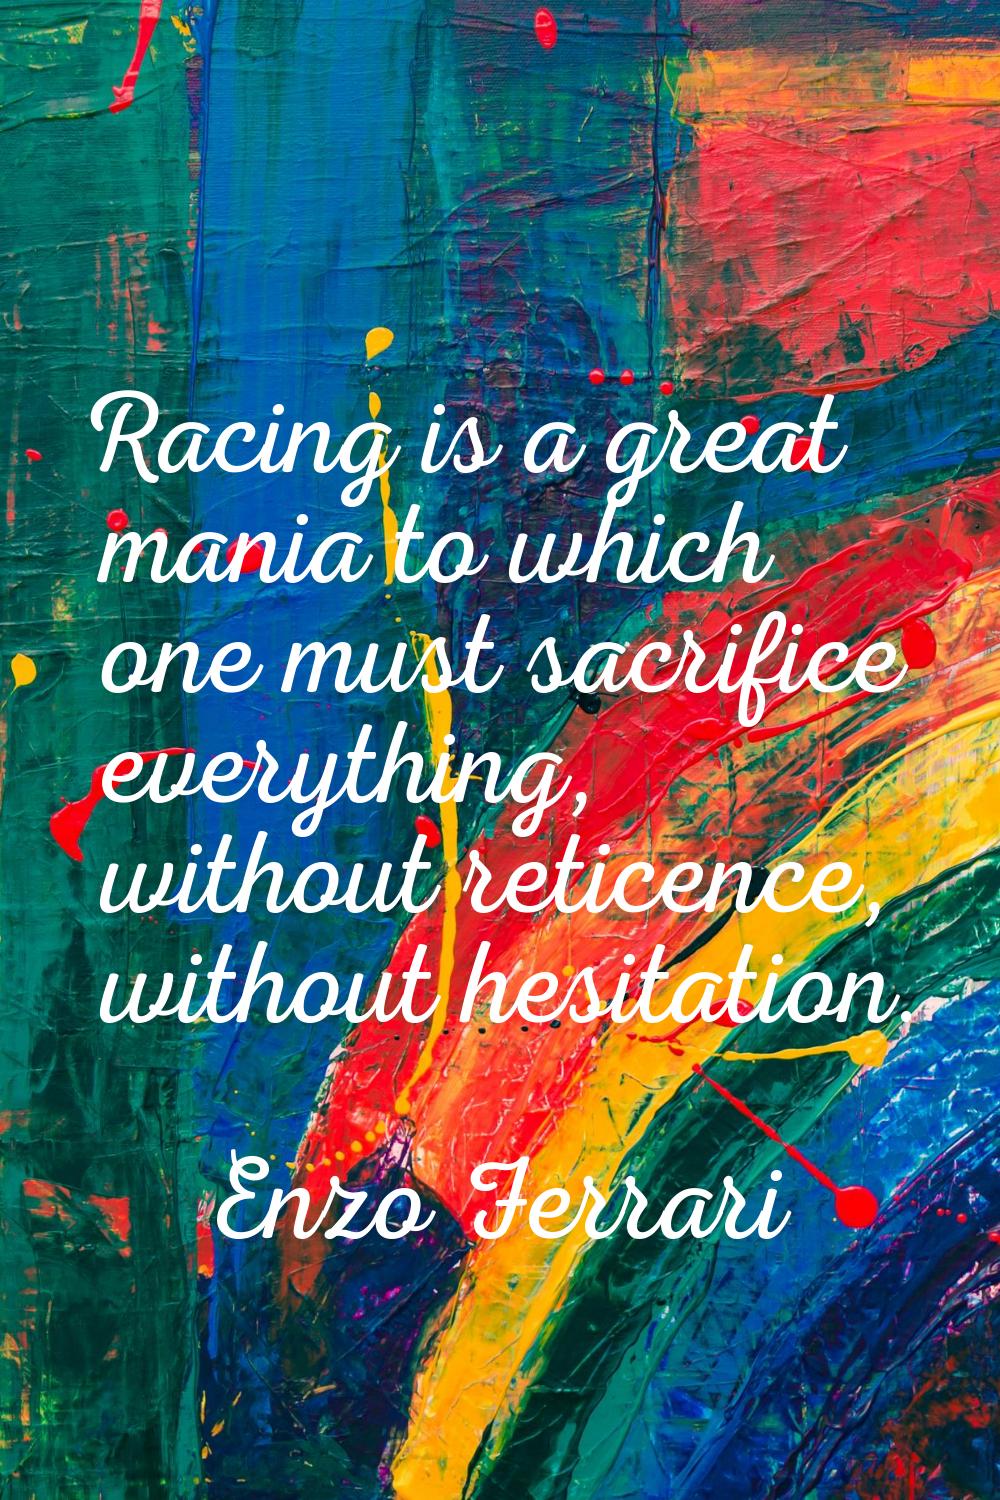 Racing is a great mania to which one must sacrifice everything, without reticence, without hesitati